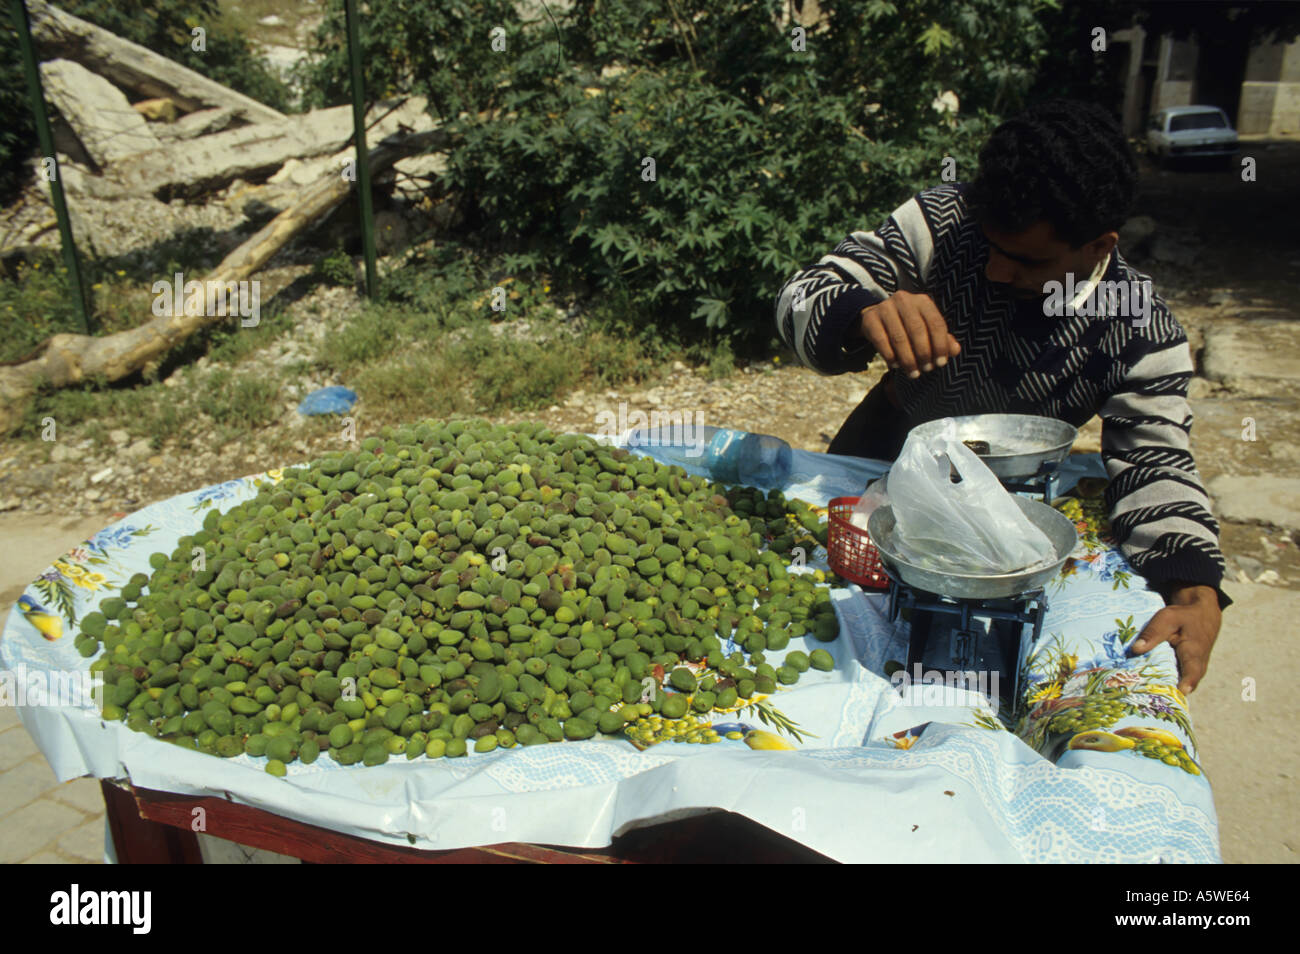 Lebanon Beirut In April 1994 After The Civil War A Street Seller Serving Almonds Stock Photo